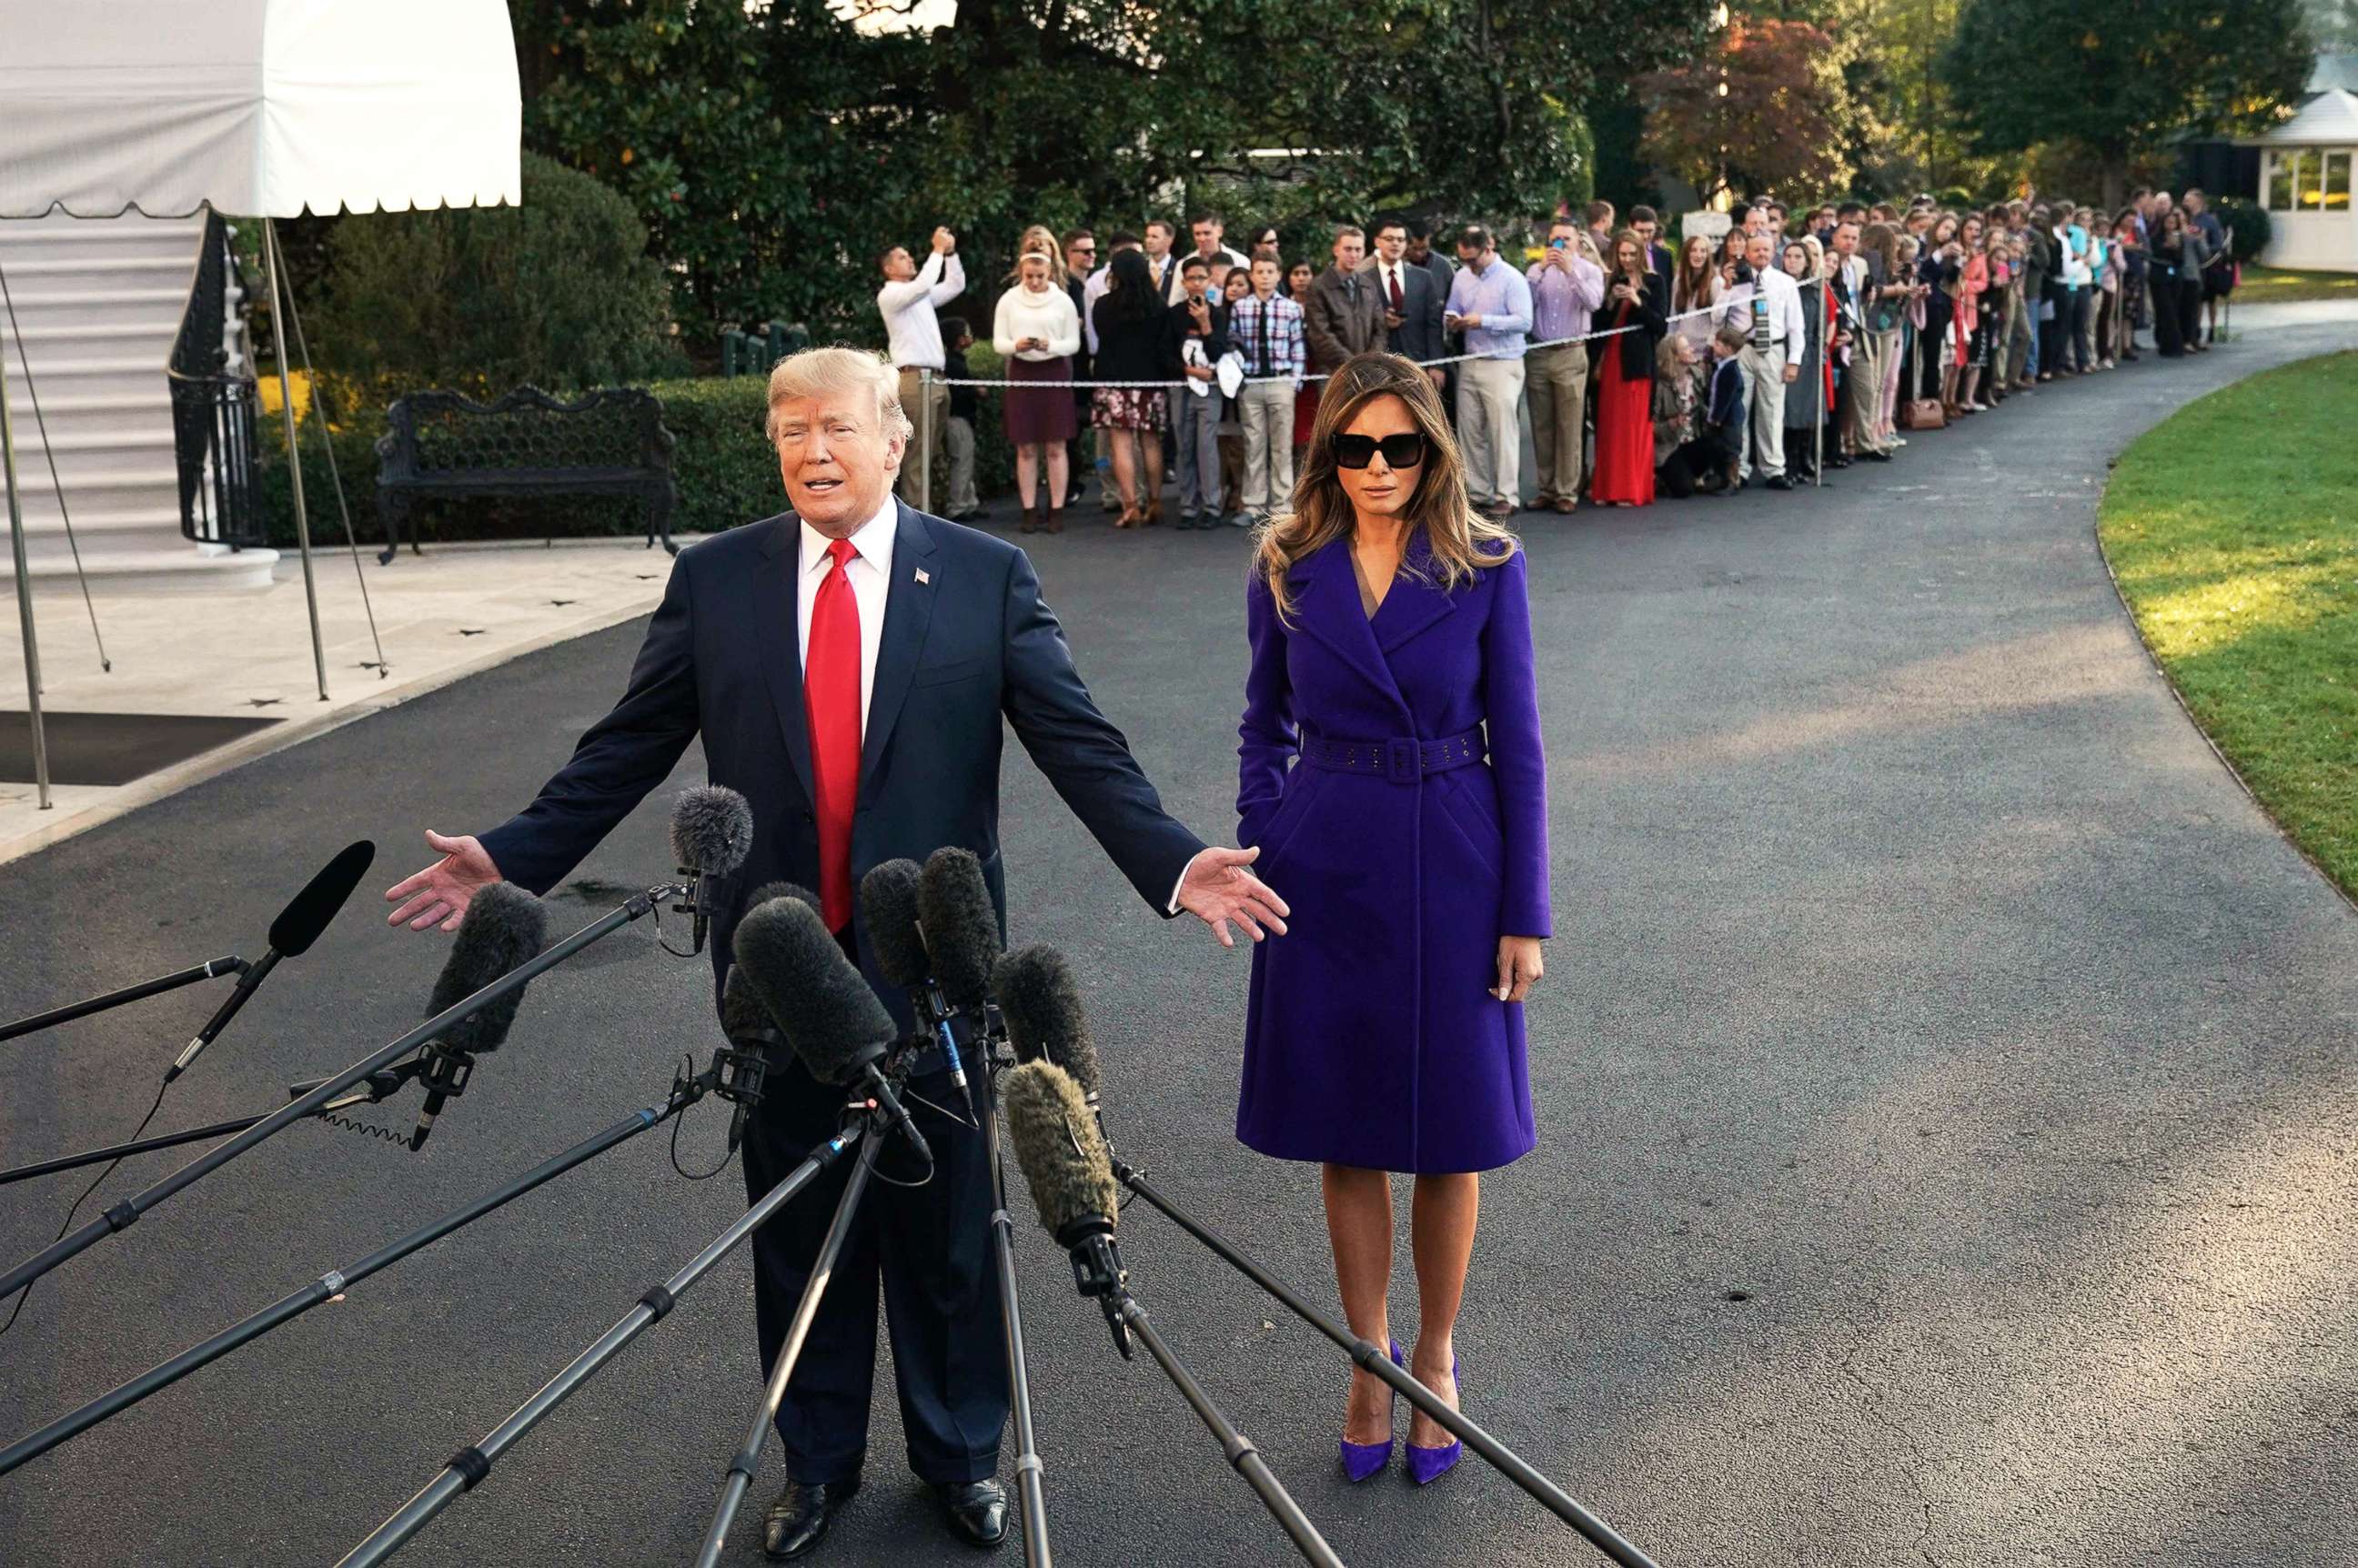 PHOTO: President Donald Trump and First Lady Melania Trump speak to the press as they make their way to board Marine One before departing from the South Lawn of the White House, Nov. 3, 2017.